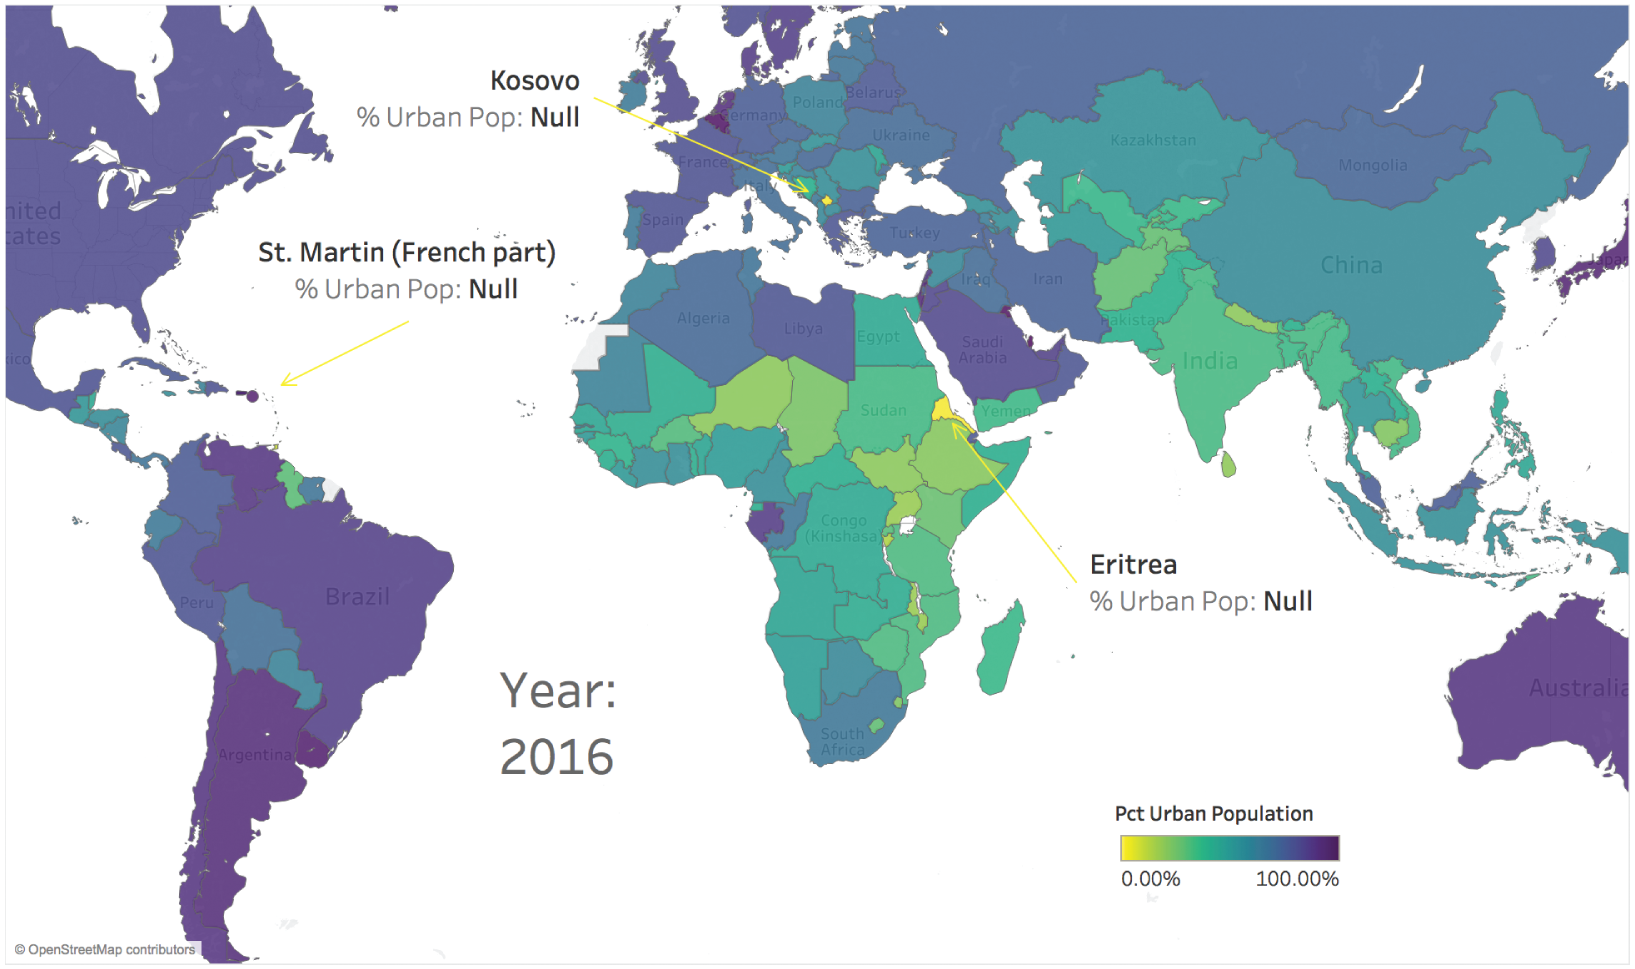 Map depicting the percent of urban population in 2016, all countries included.